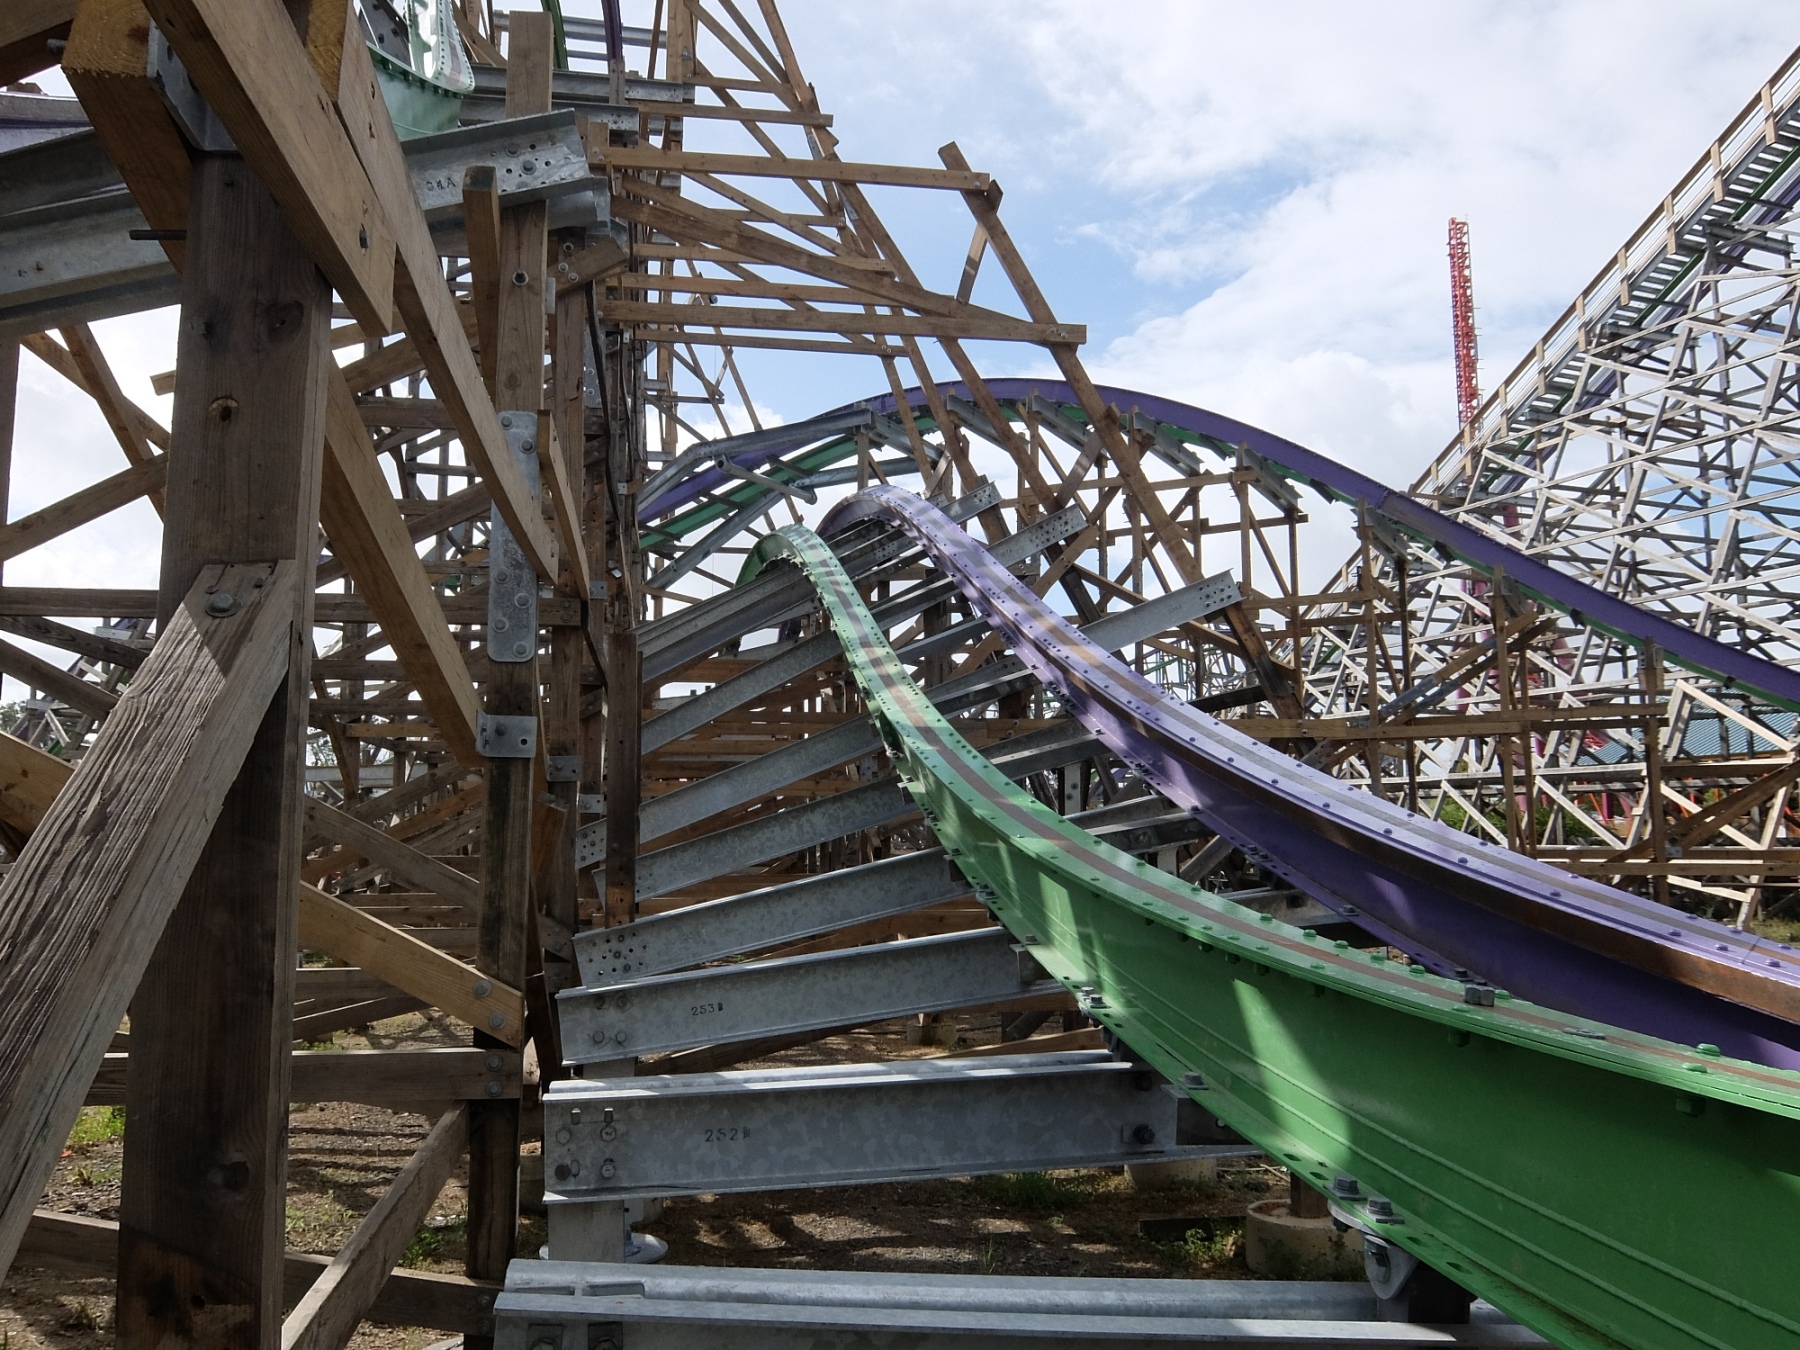 The bendy track coming under the camelback after the breaking wave turn.